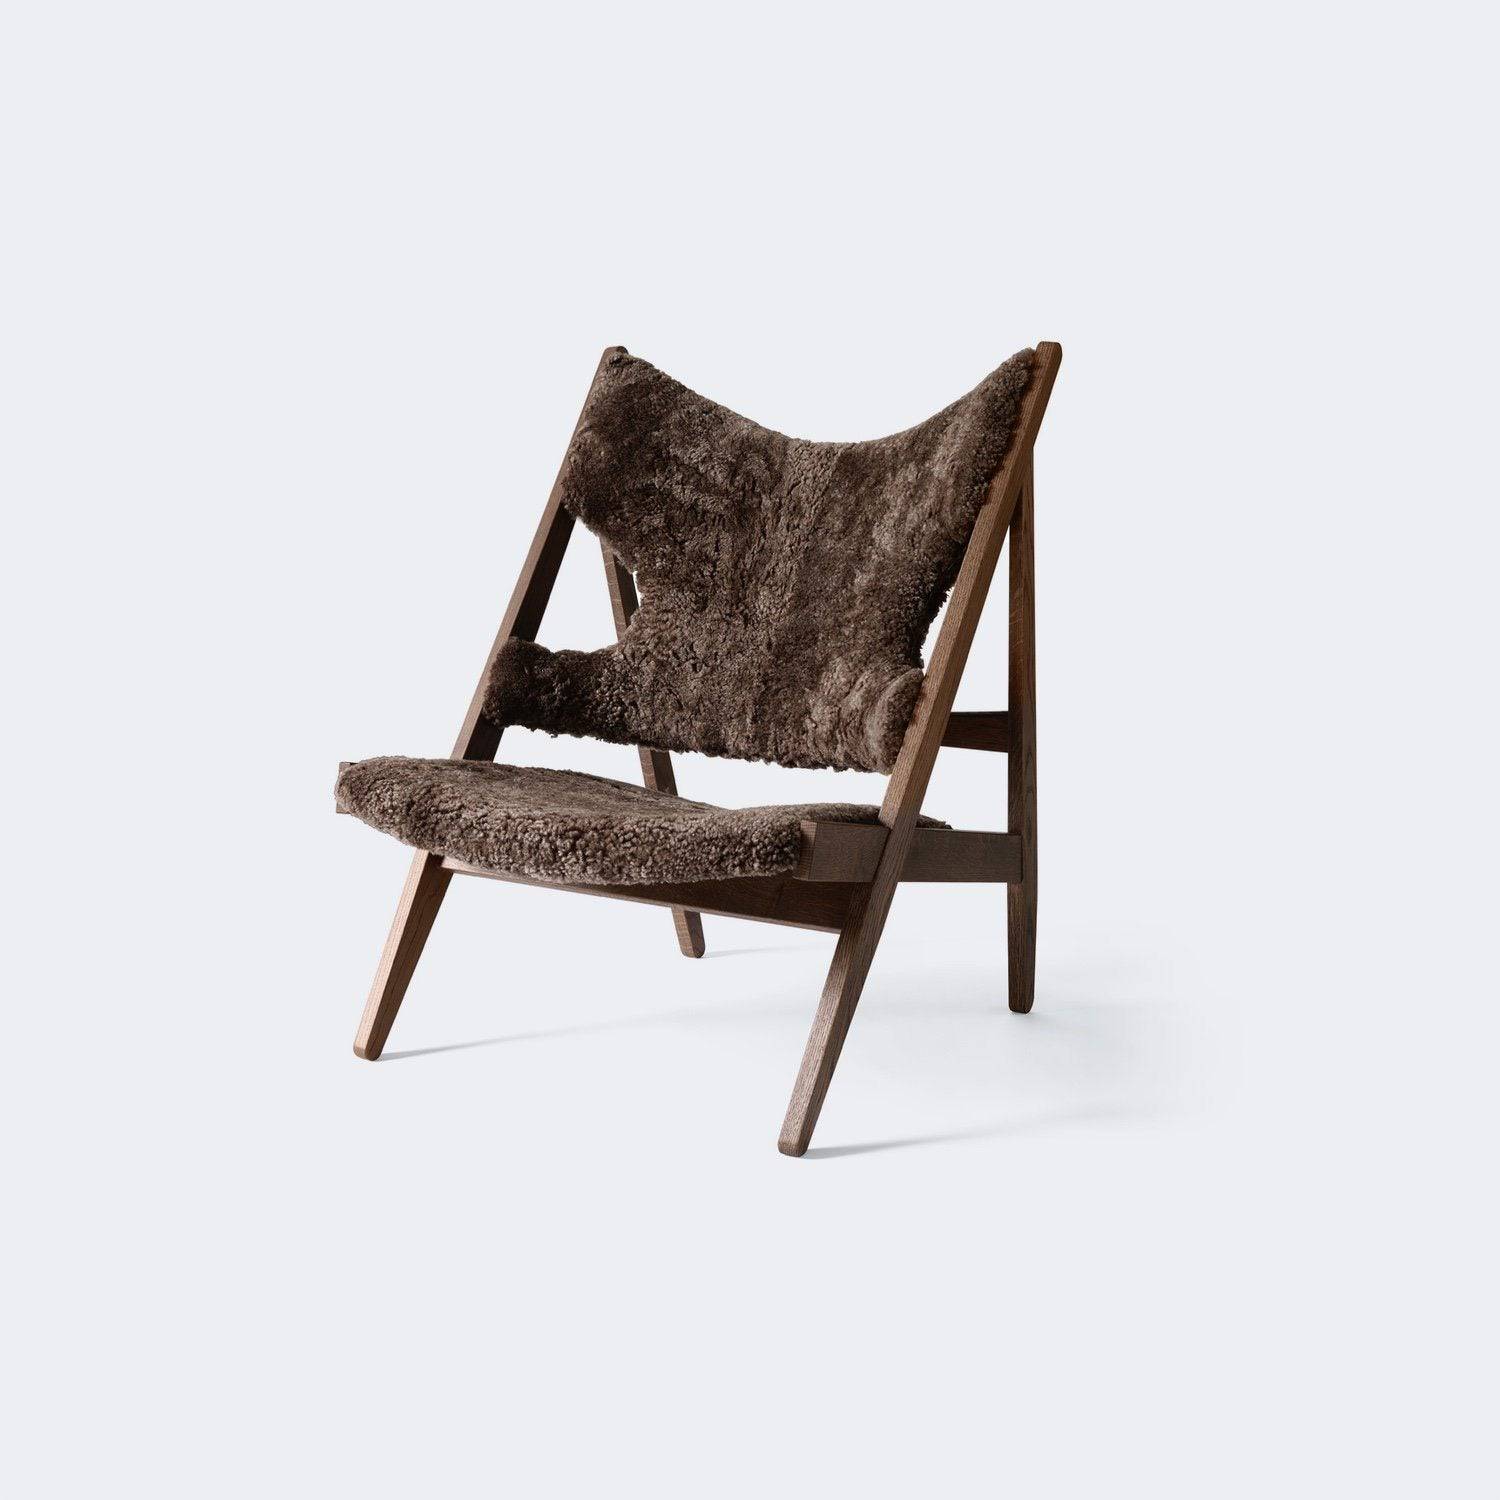 Audo Copenhagen Knitting Chair, Sheepskin Upholstery Made To Order Dark Stained Oak/Root, (Dark Brown) - KANSO#Frame/Fabric Color_Dark Stained Oak/Root, (Dark Brown)